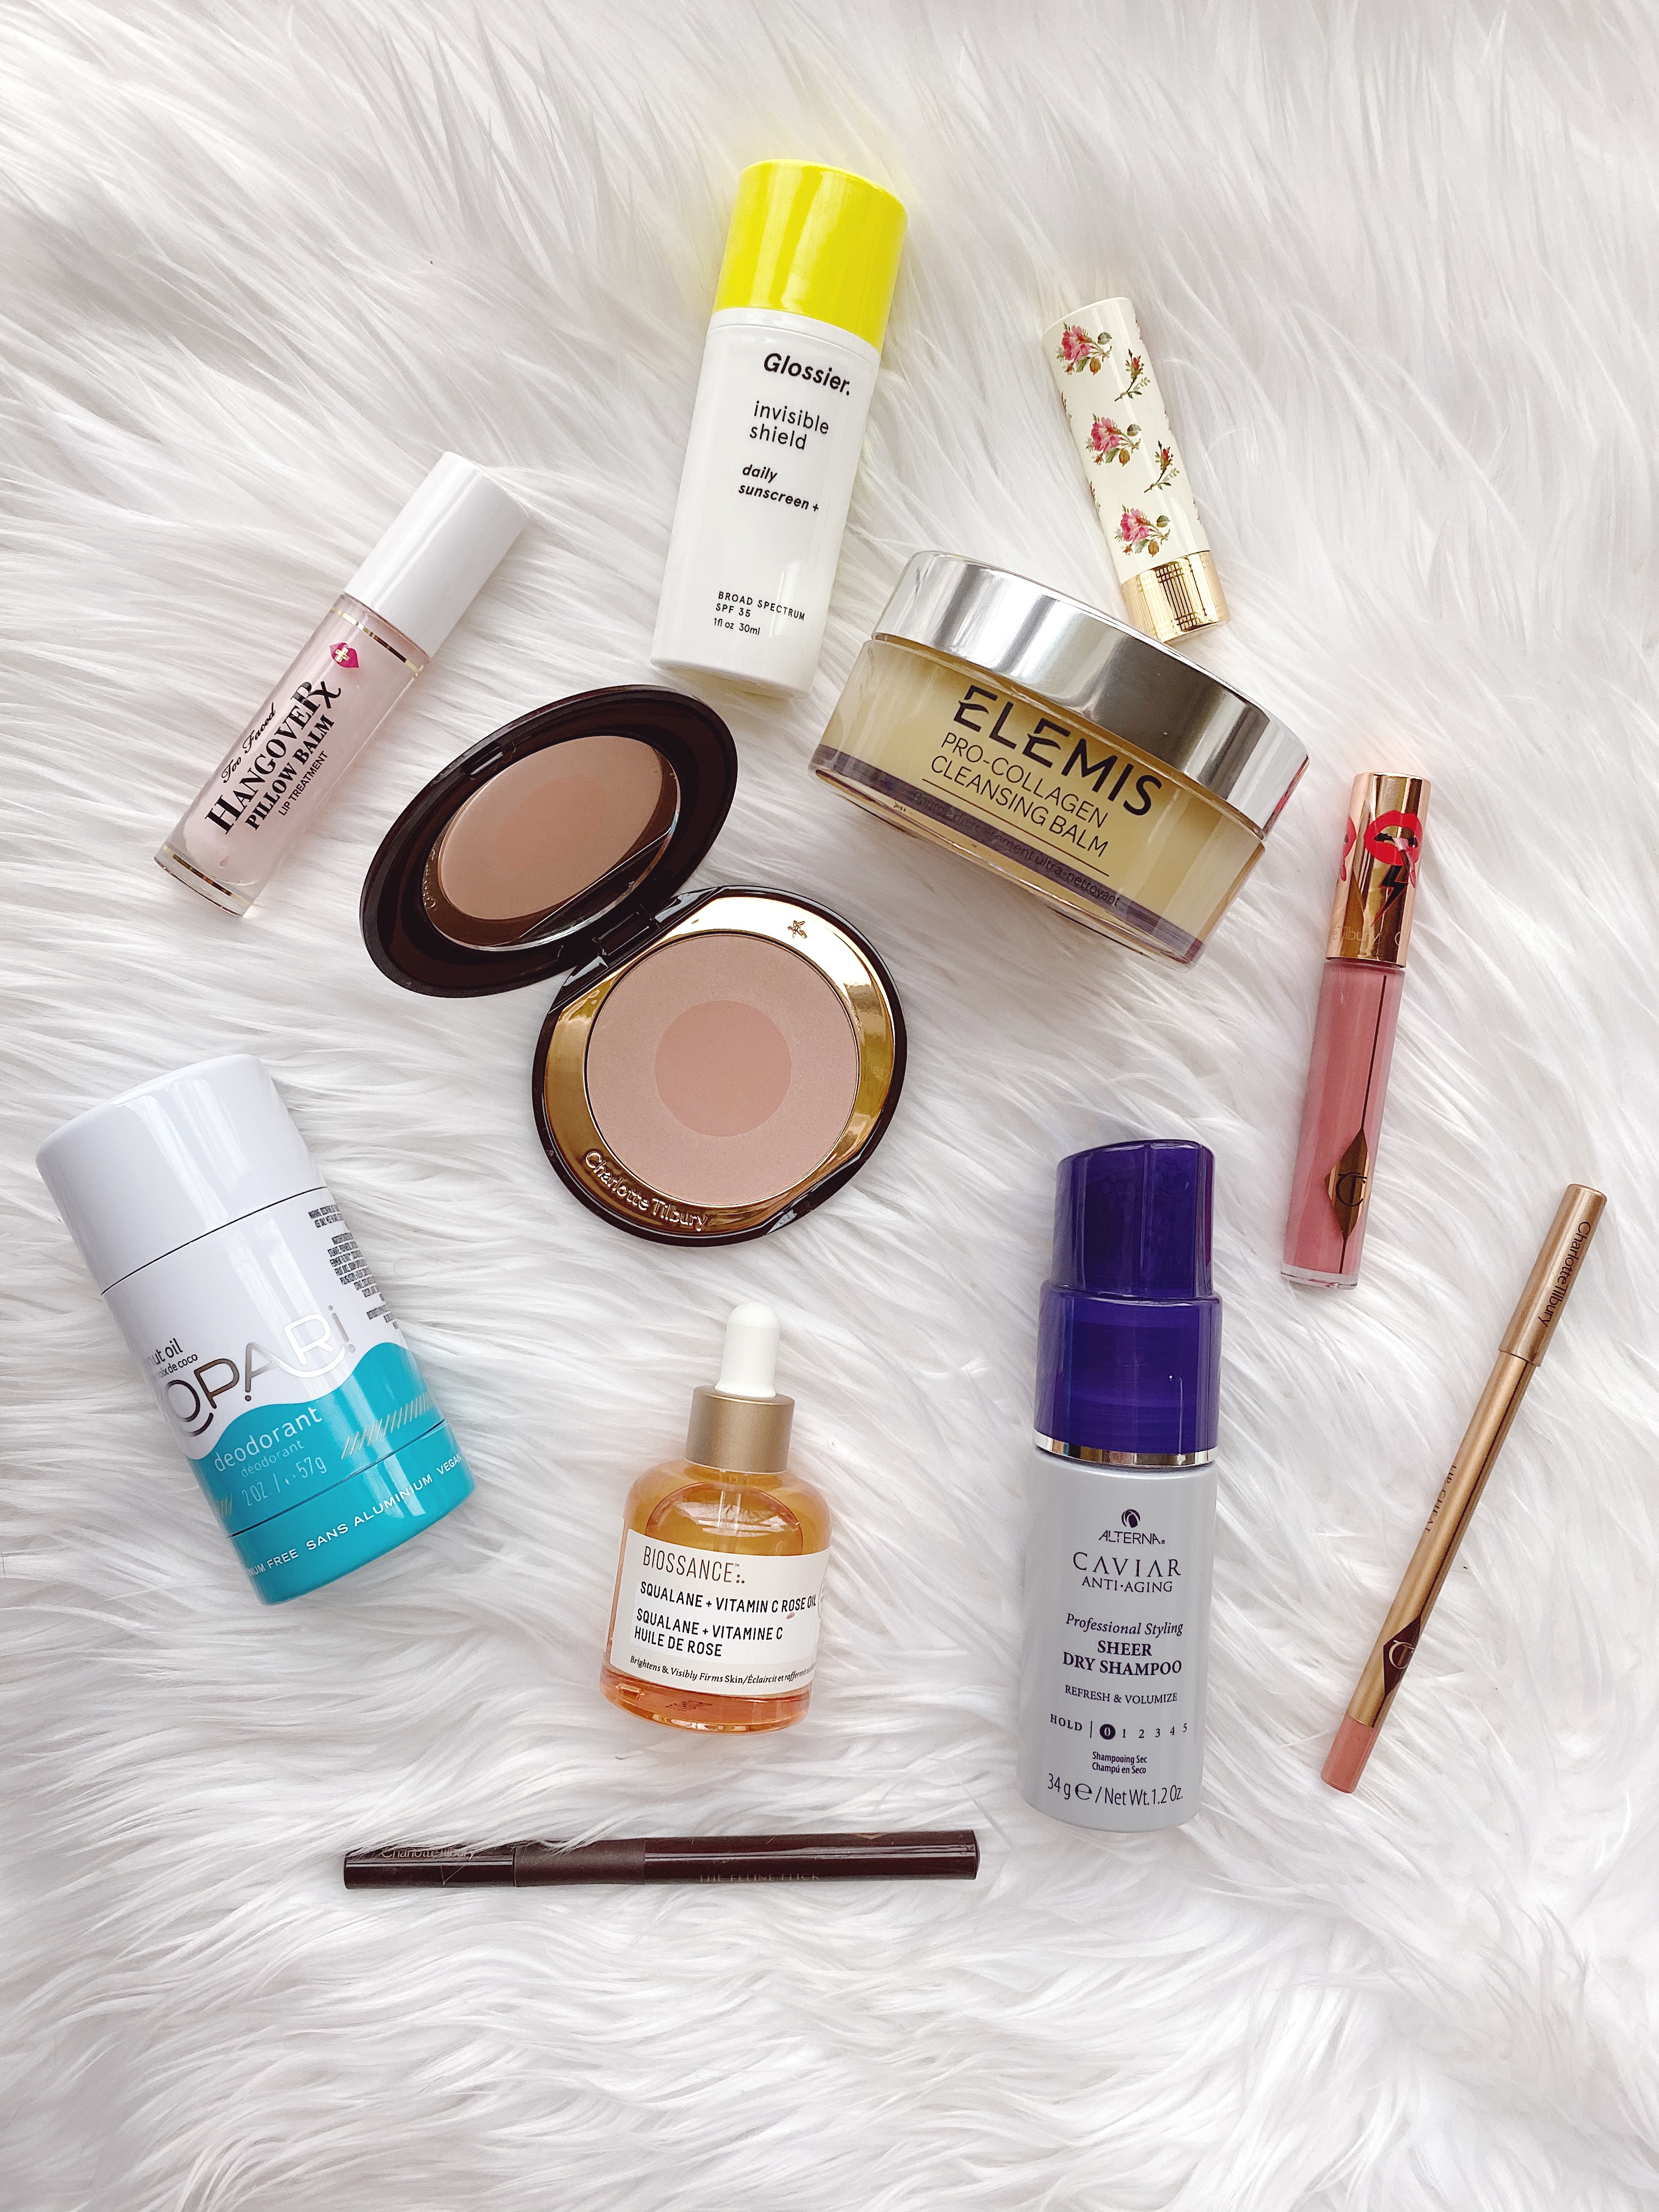 Beauty-products-skincare-nordstrom-sephora-charlotte-tilbury-kopari-elemis-cleansing-balm-clean-beauty-best-beauty-products